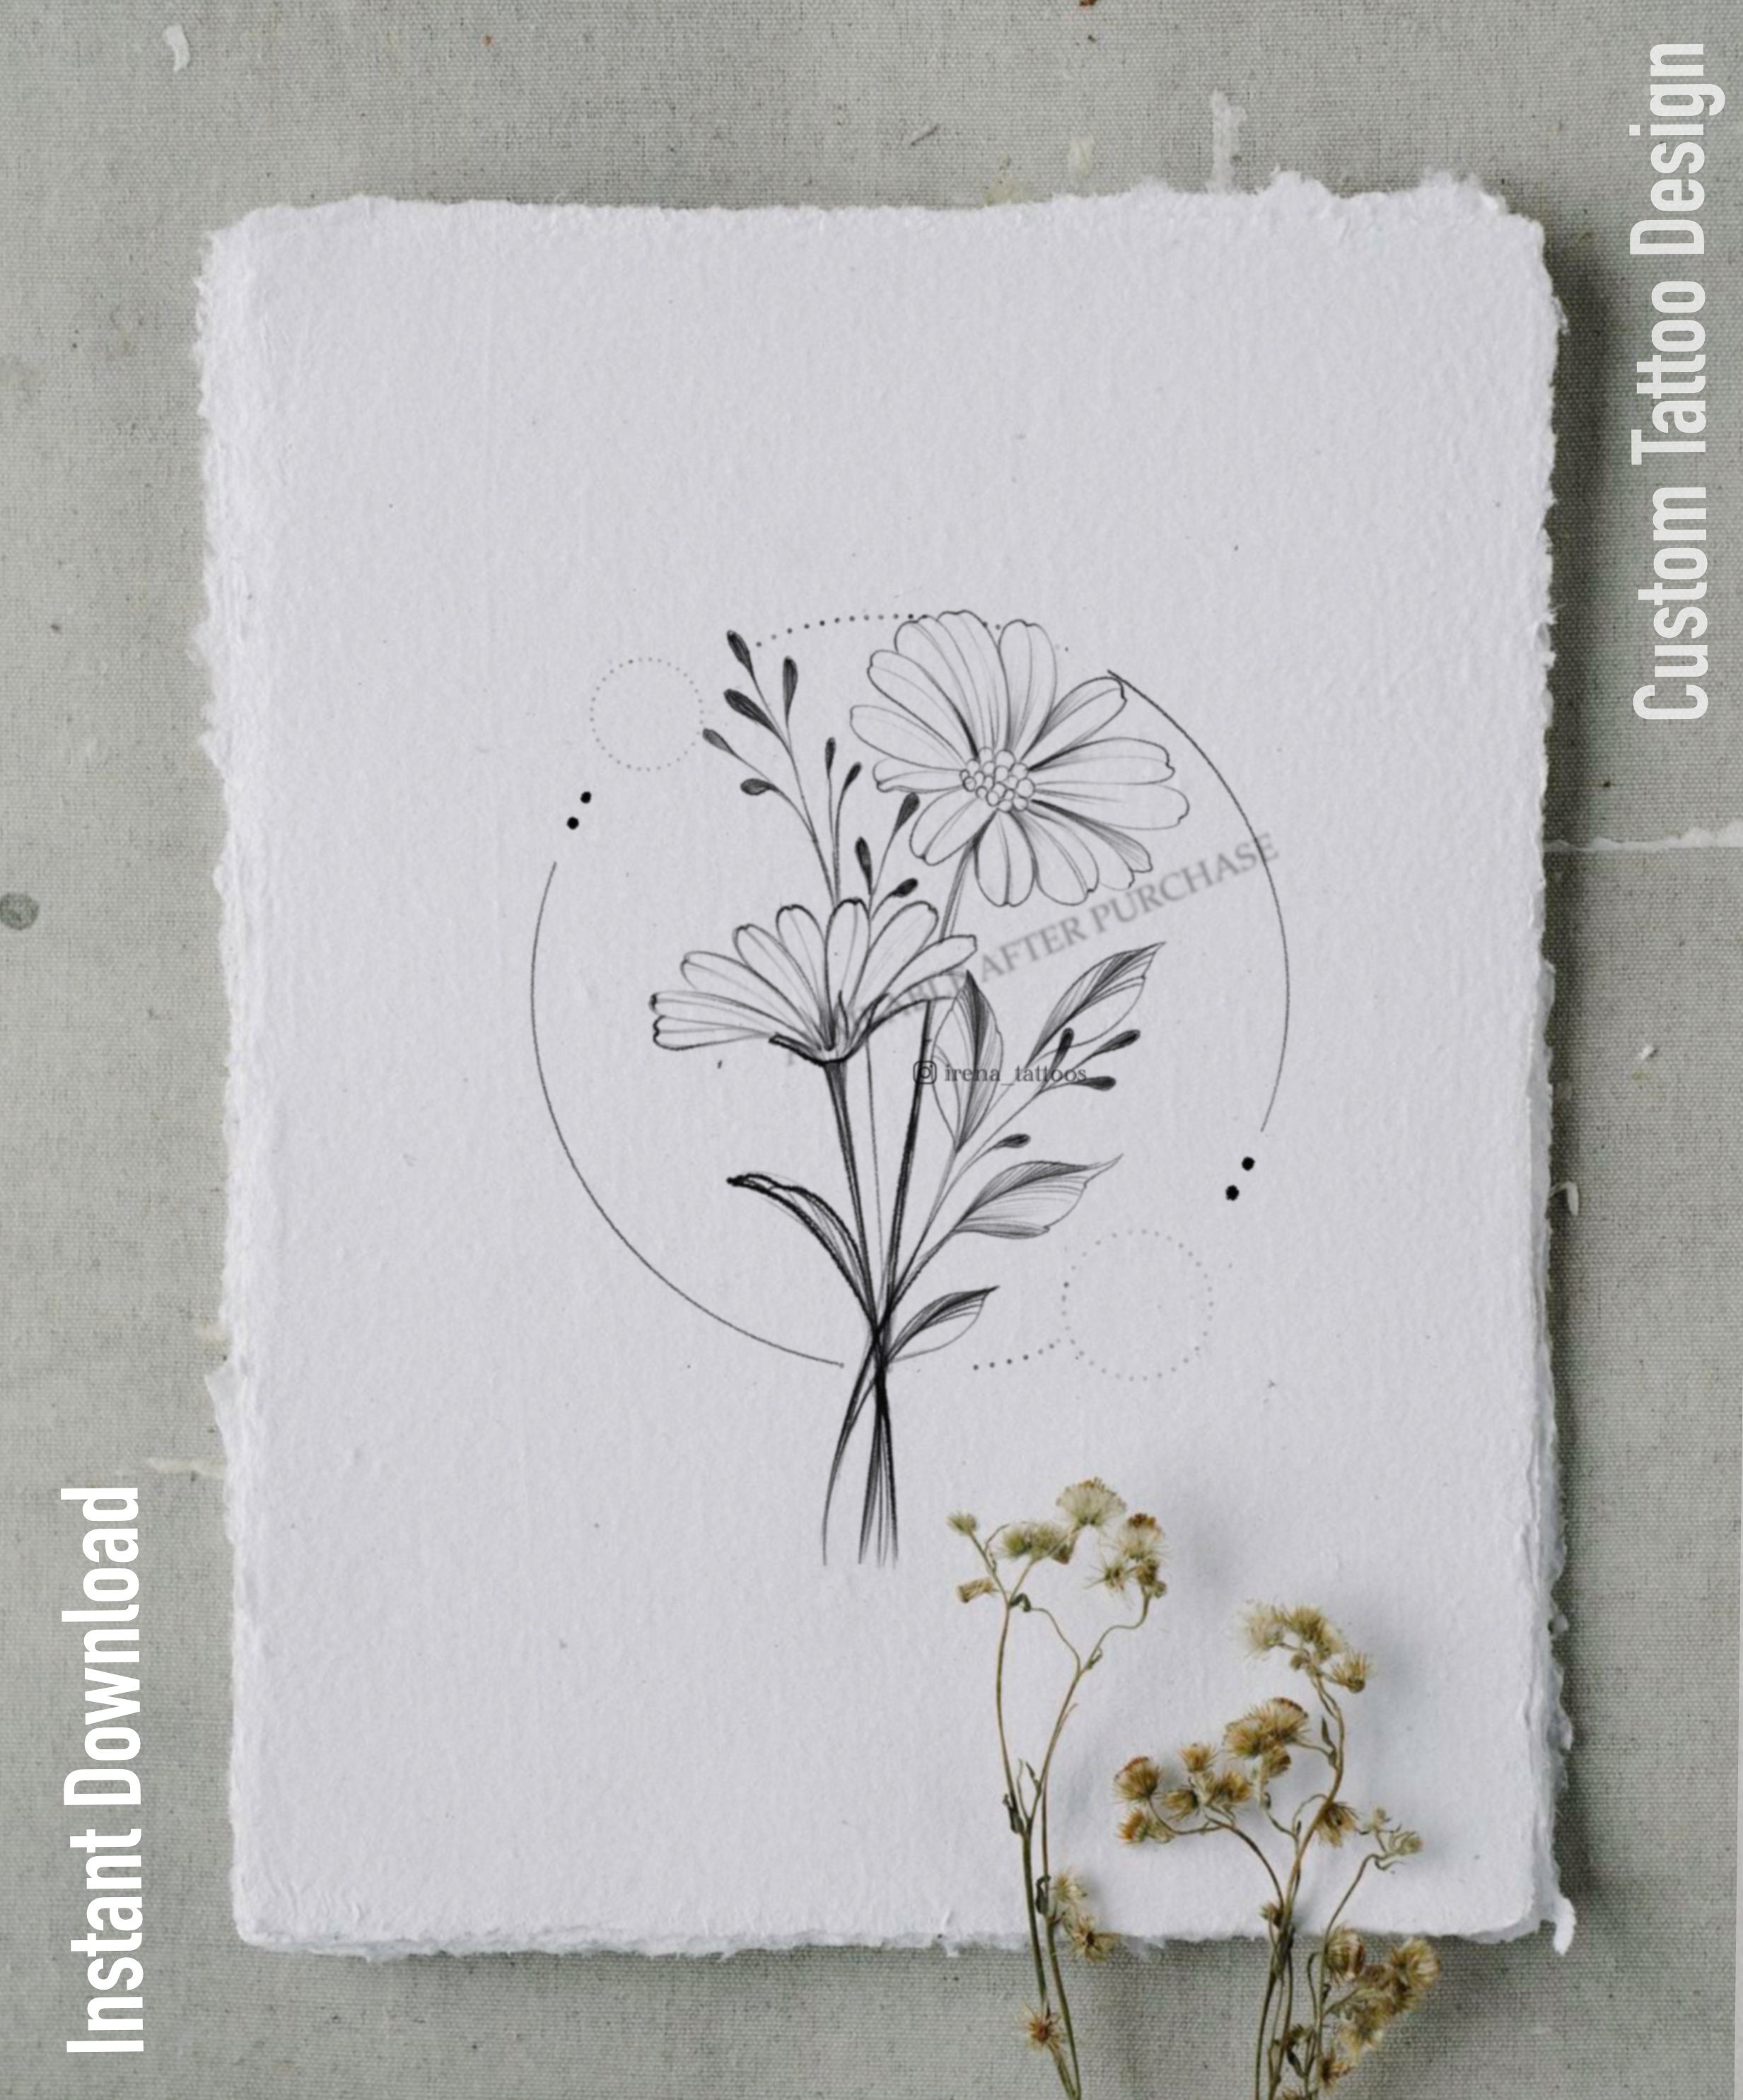 Buy Daisy Flower Tattoo Design Printable Stencil Instant Online in India   Etsy